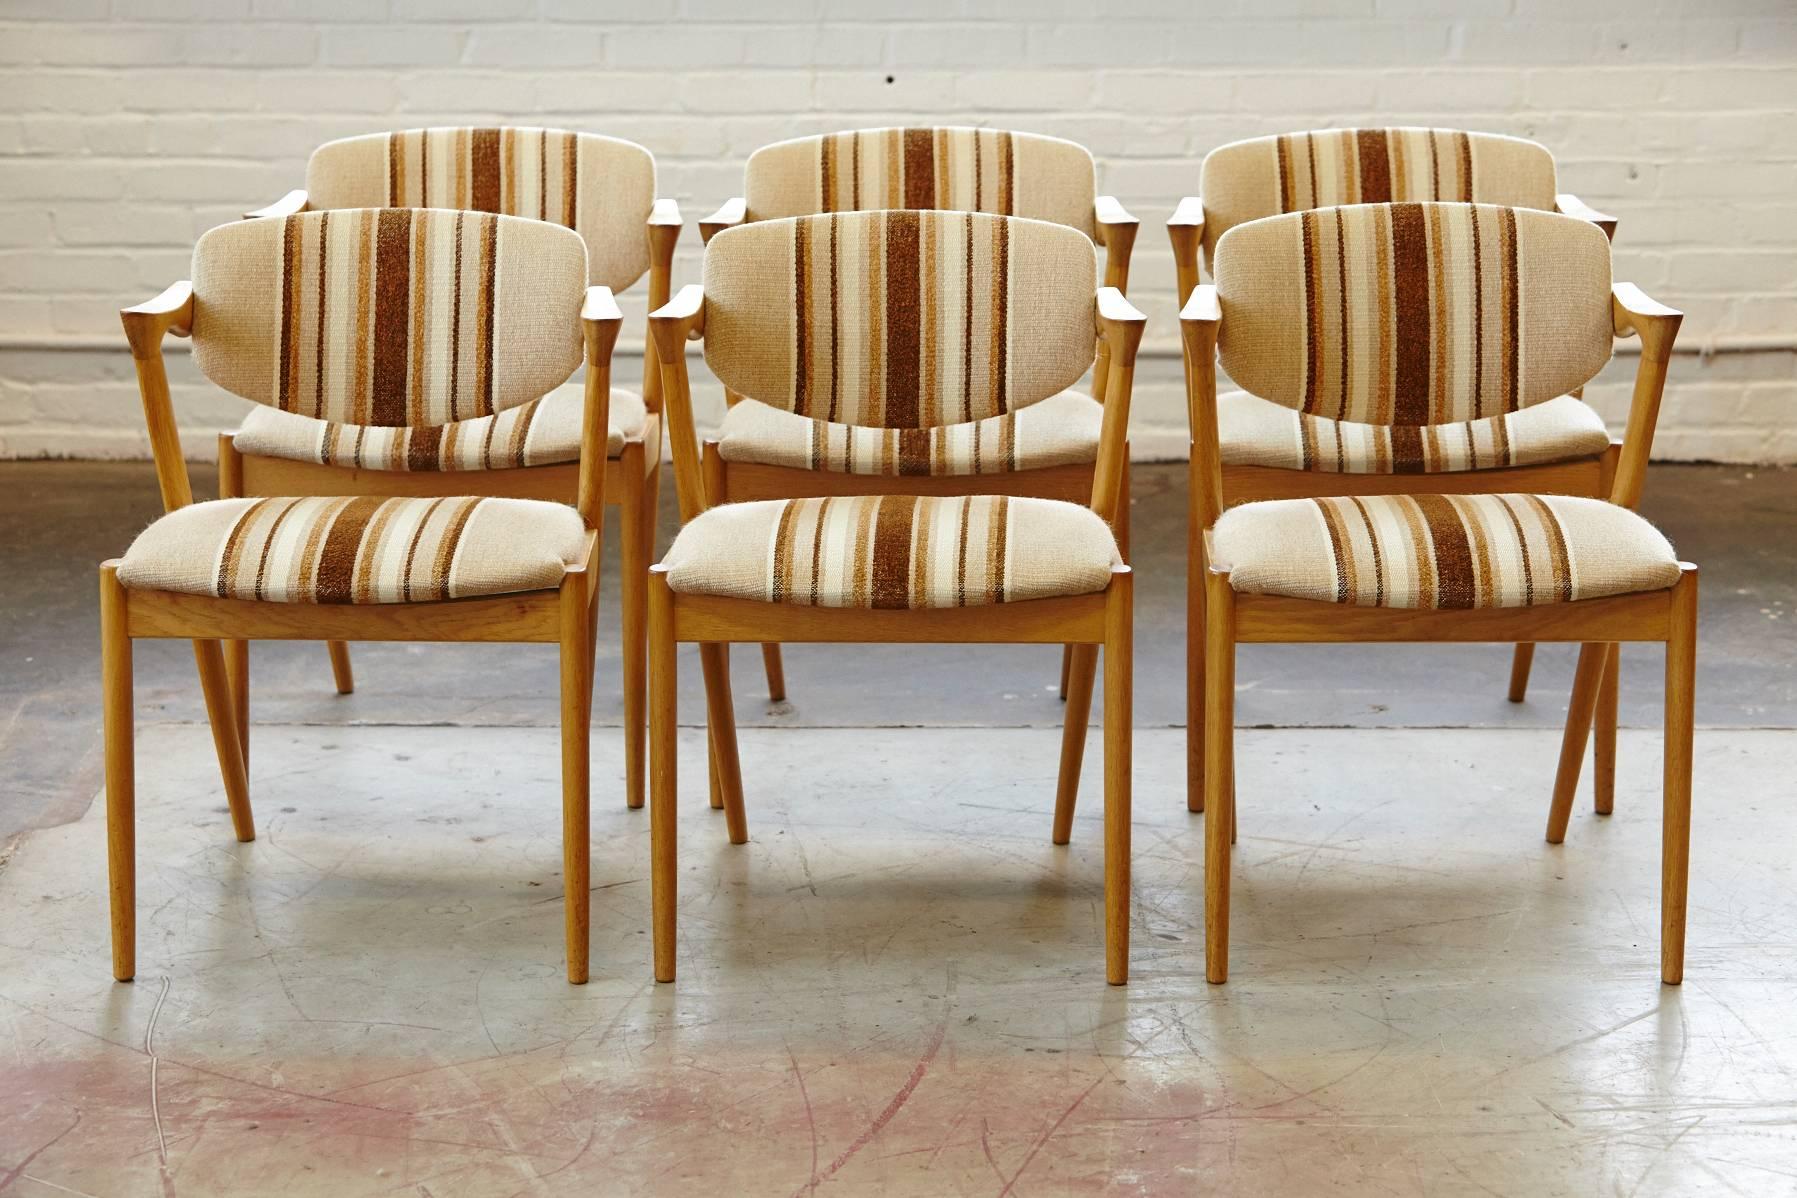 An iconic design featuring stunning angles and a tilting backrest. Retains its original cream and brown-striped fabric which makes a superb match with the rich oak color of the base. One of the most stylish chairs to come of the 1950s creating a